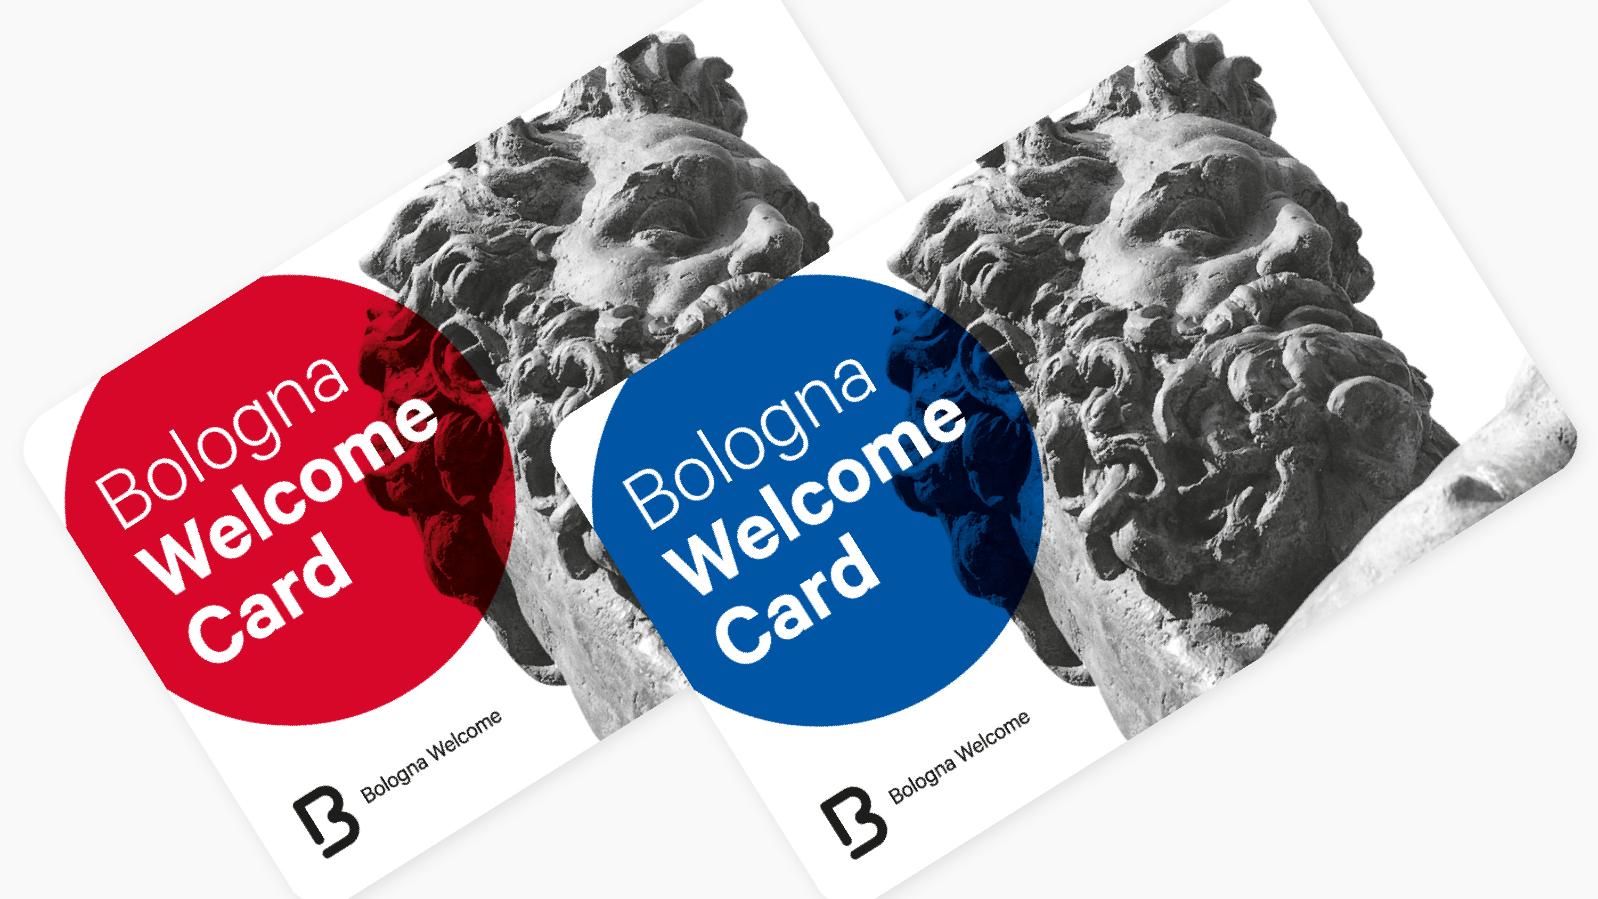 Discover what’s best with Bologna Welcome Cards